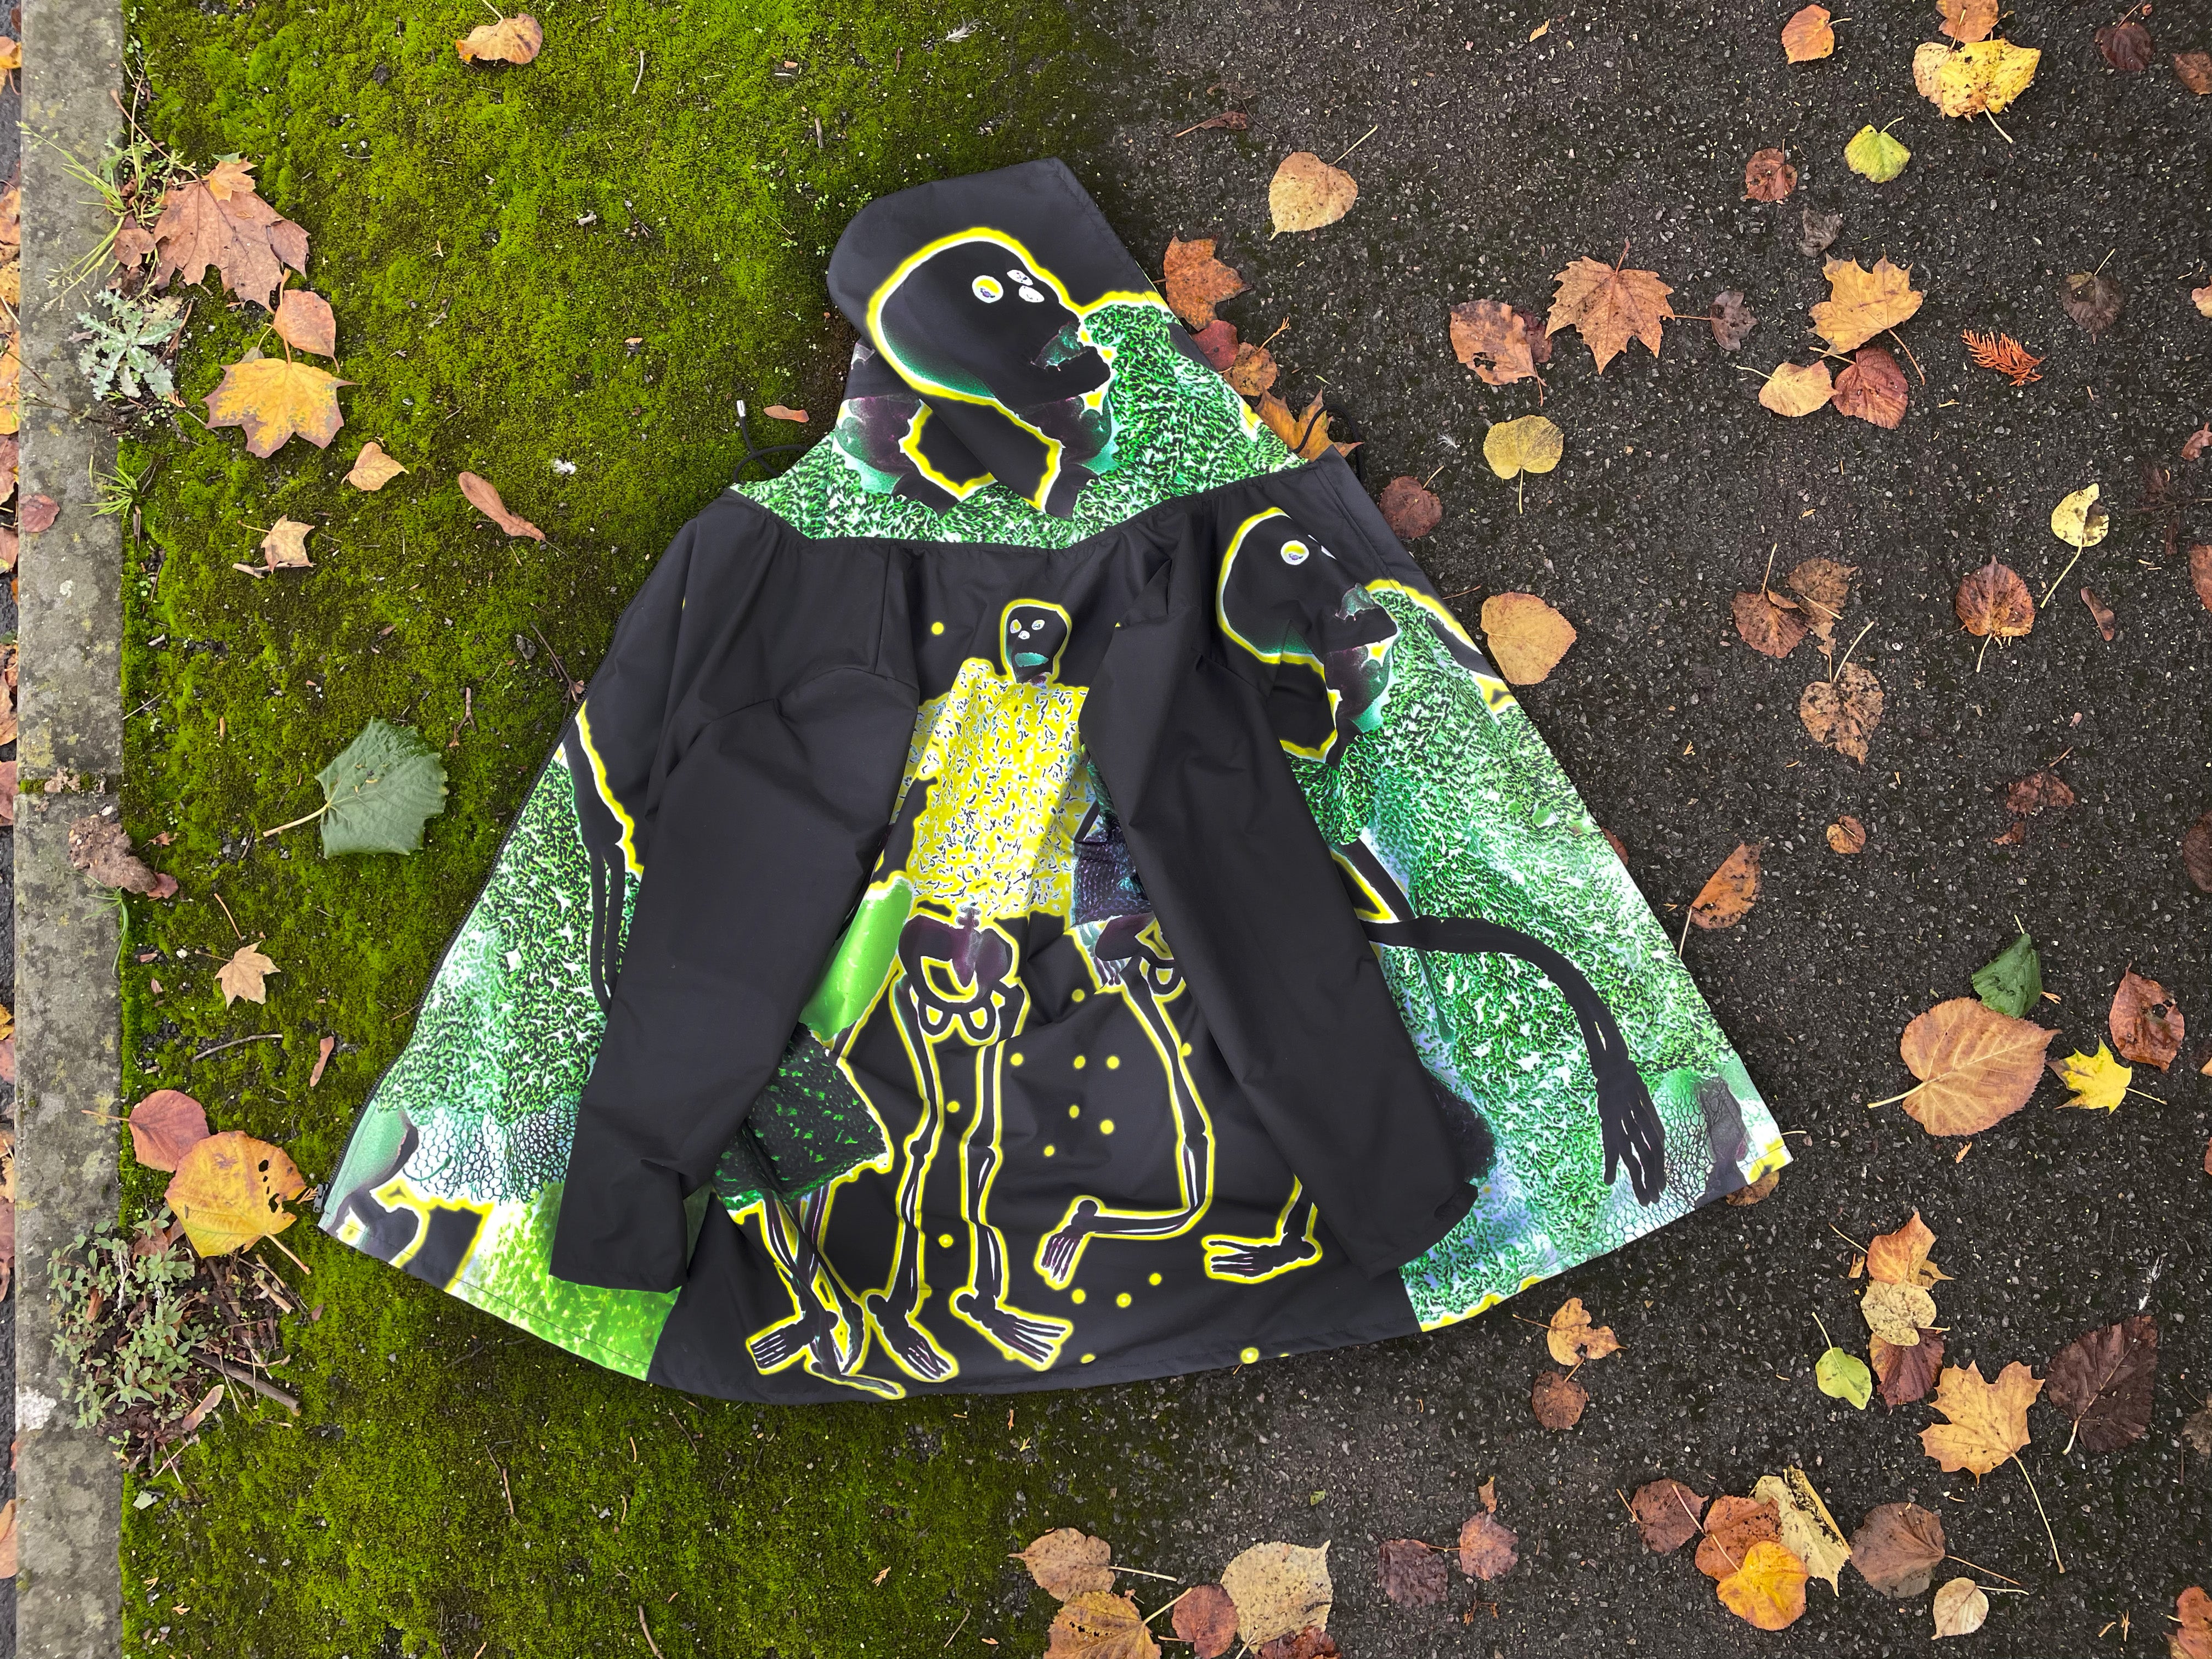 Black waterproof raincoat with skeletons print. On green moss and autumn leaves